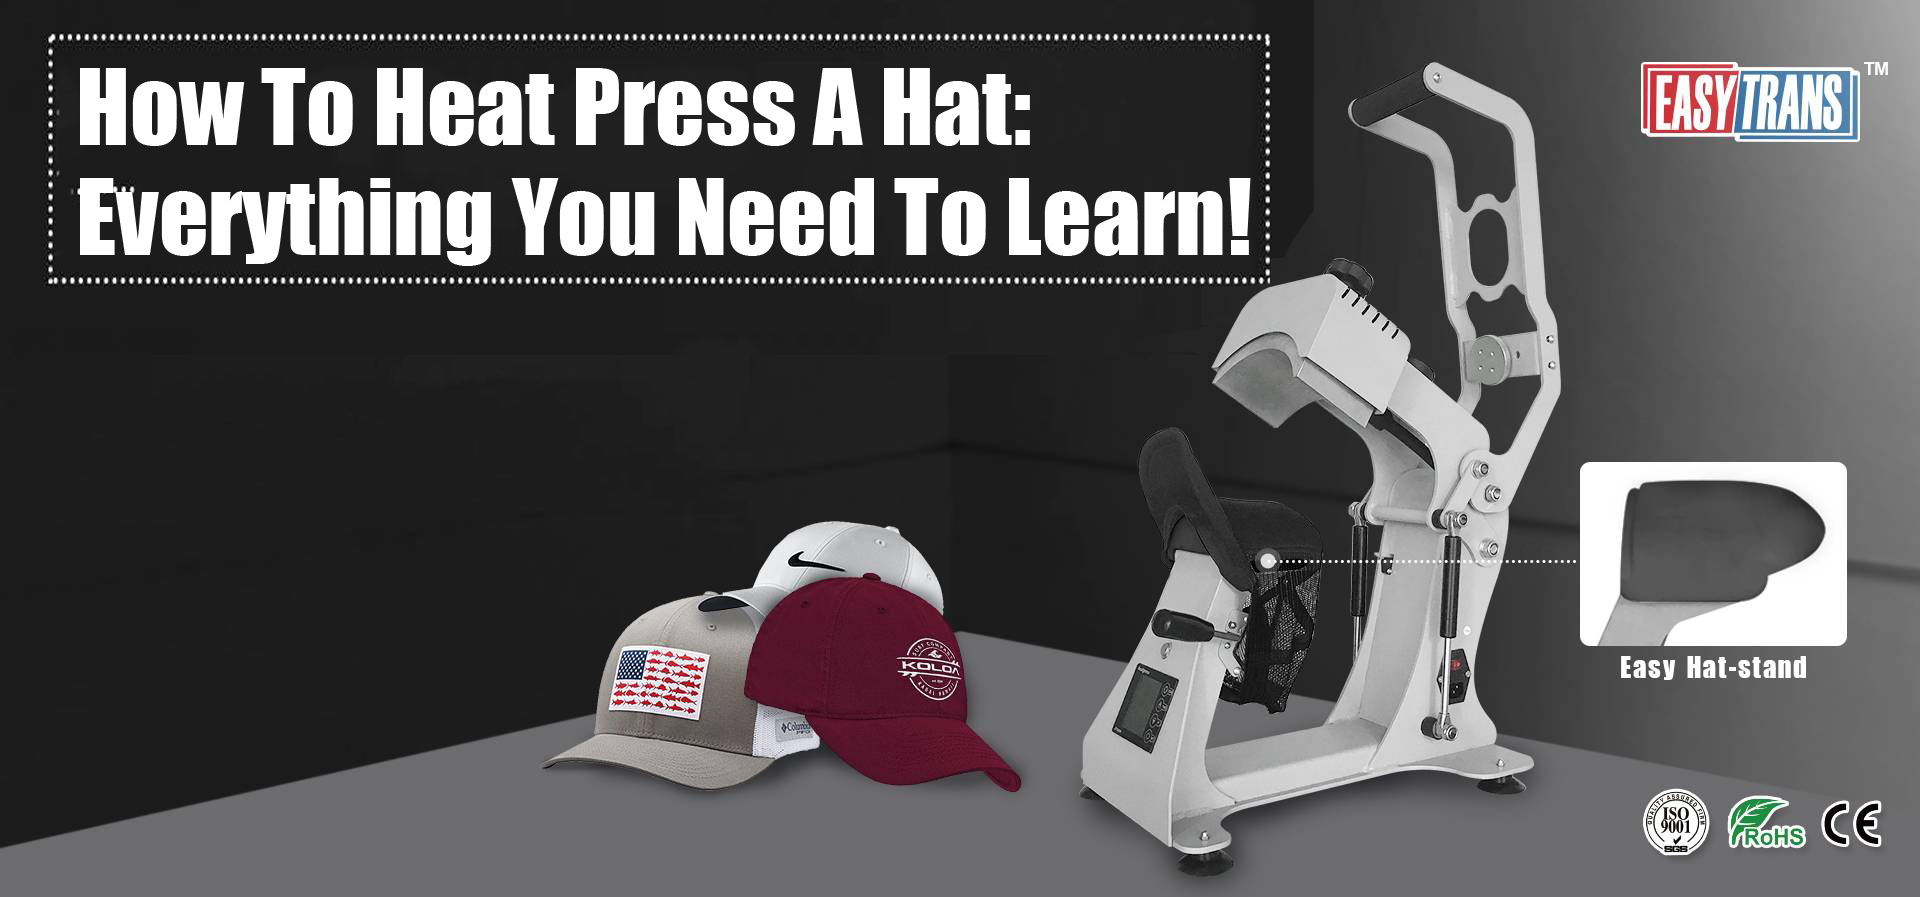 How To Heat Press A Hat: Everything You Need To Learn!